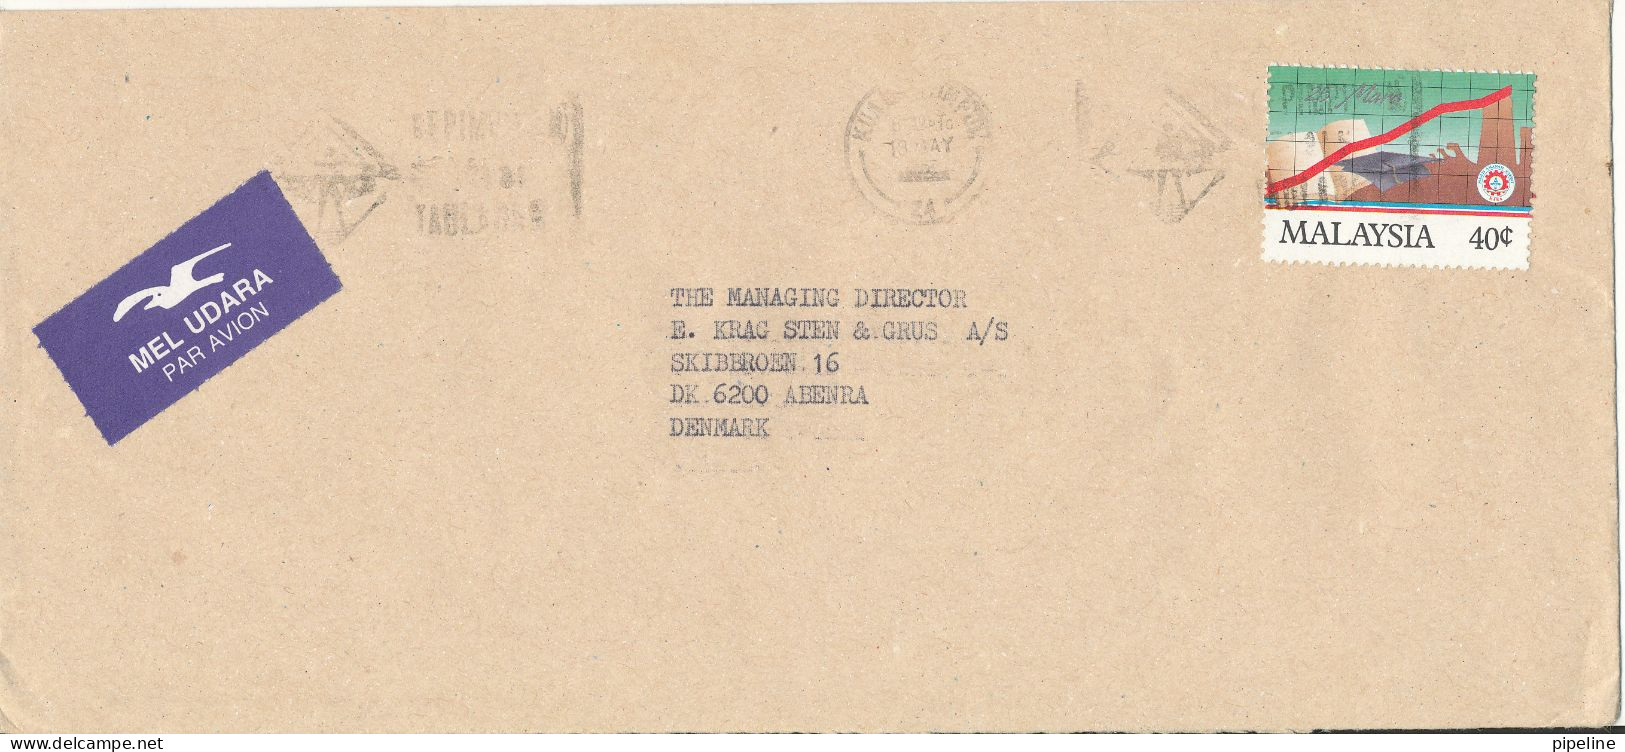 Malaysia Cover Sent Air Mail To Denmark 18-5-1991 Single Franked - Malaysia (1964-...)